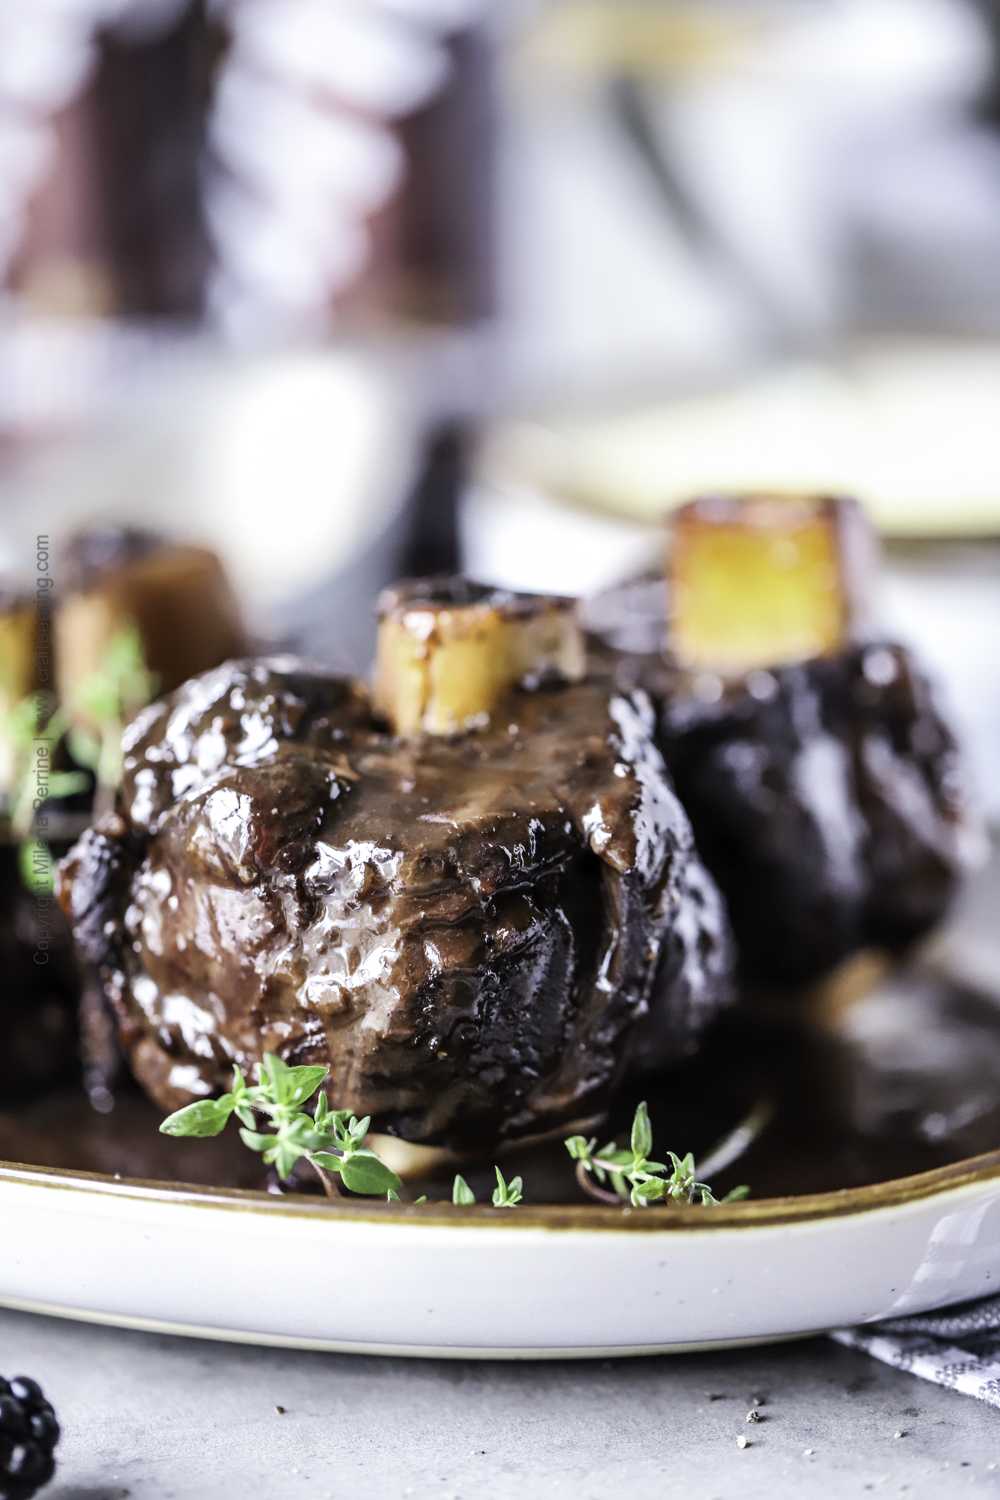 Braised venison shanks (osso buco cut) with rich blackberry and German black lager sauce.